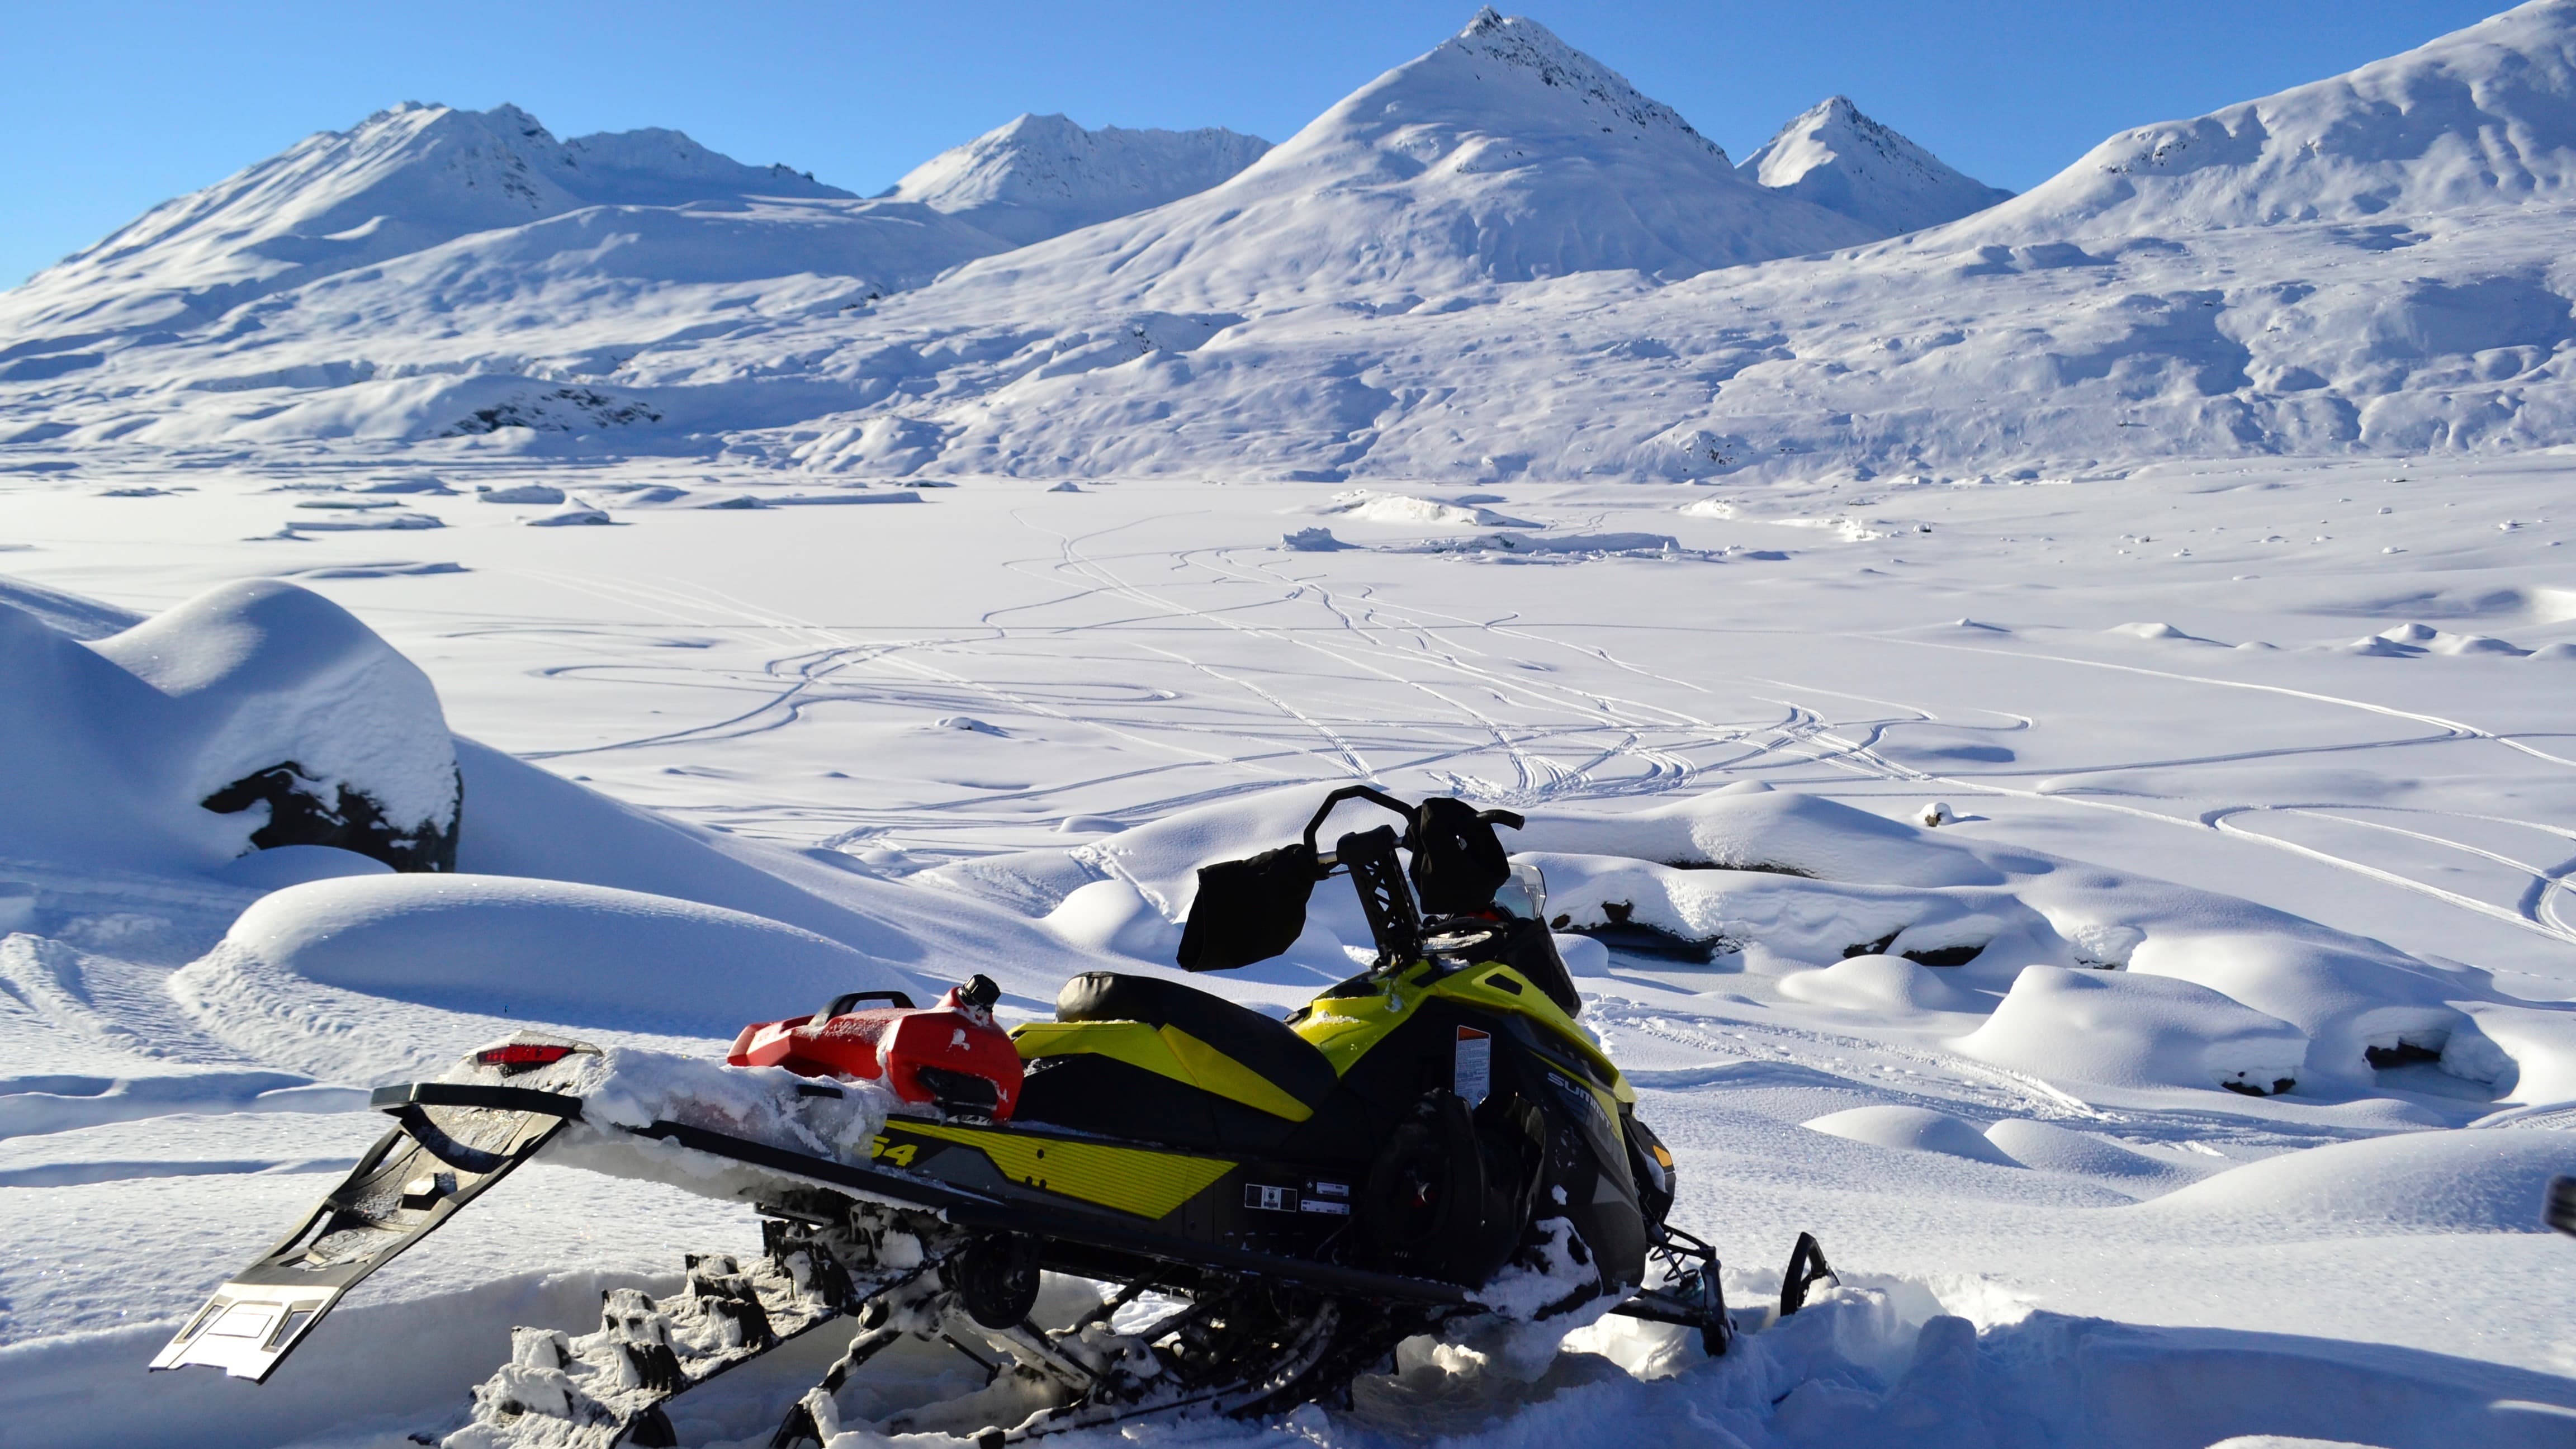 A Ski-Doo in front of big mountains 